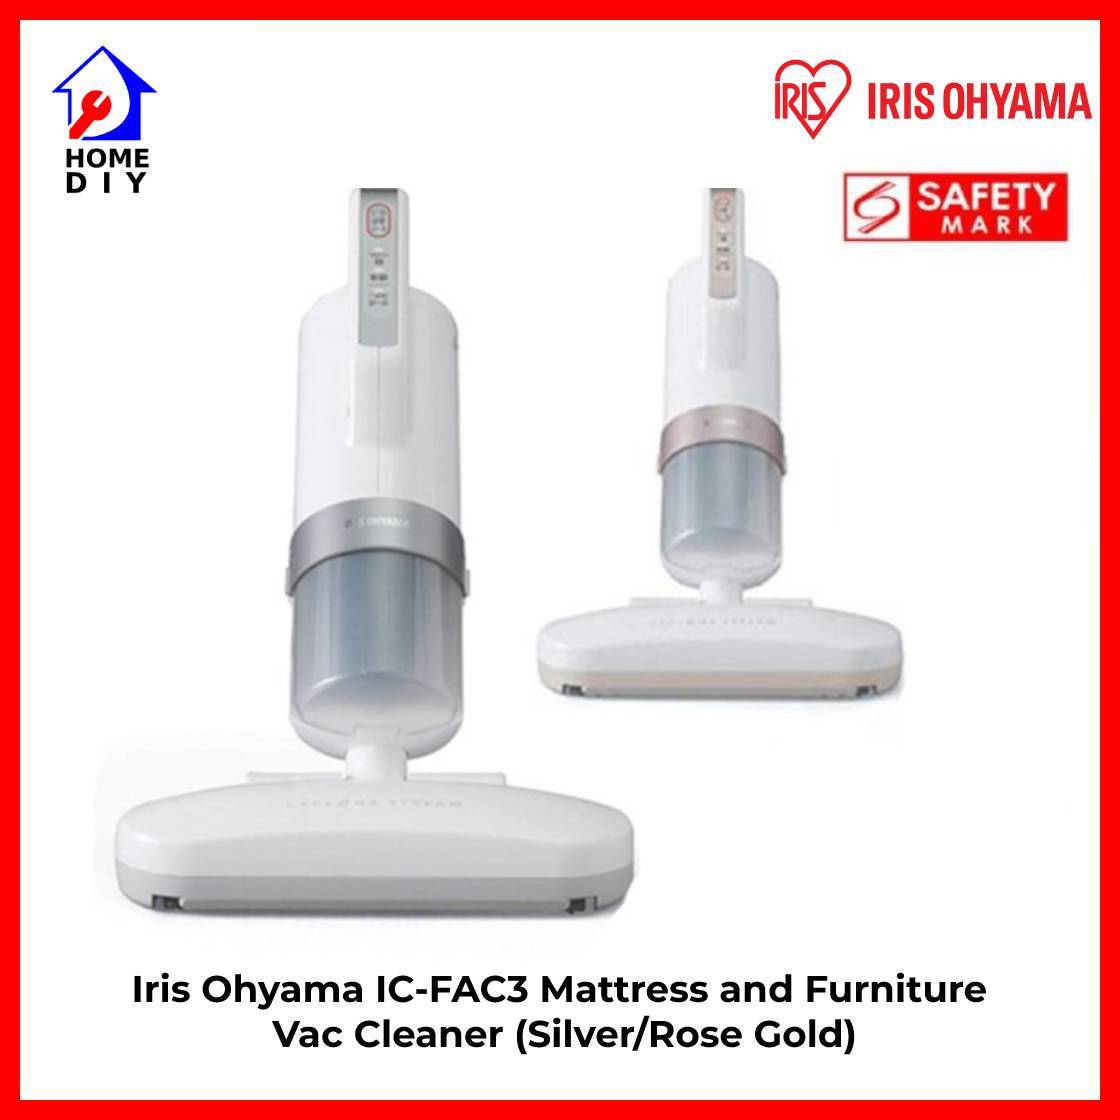 Iris Ohyama mattress Cleaner with Mite and Crepe Sensor IC-FAC3